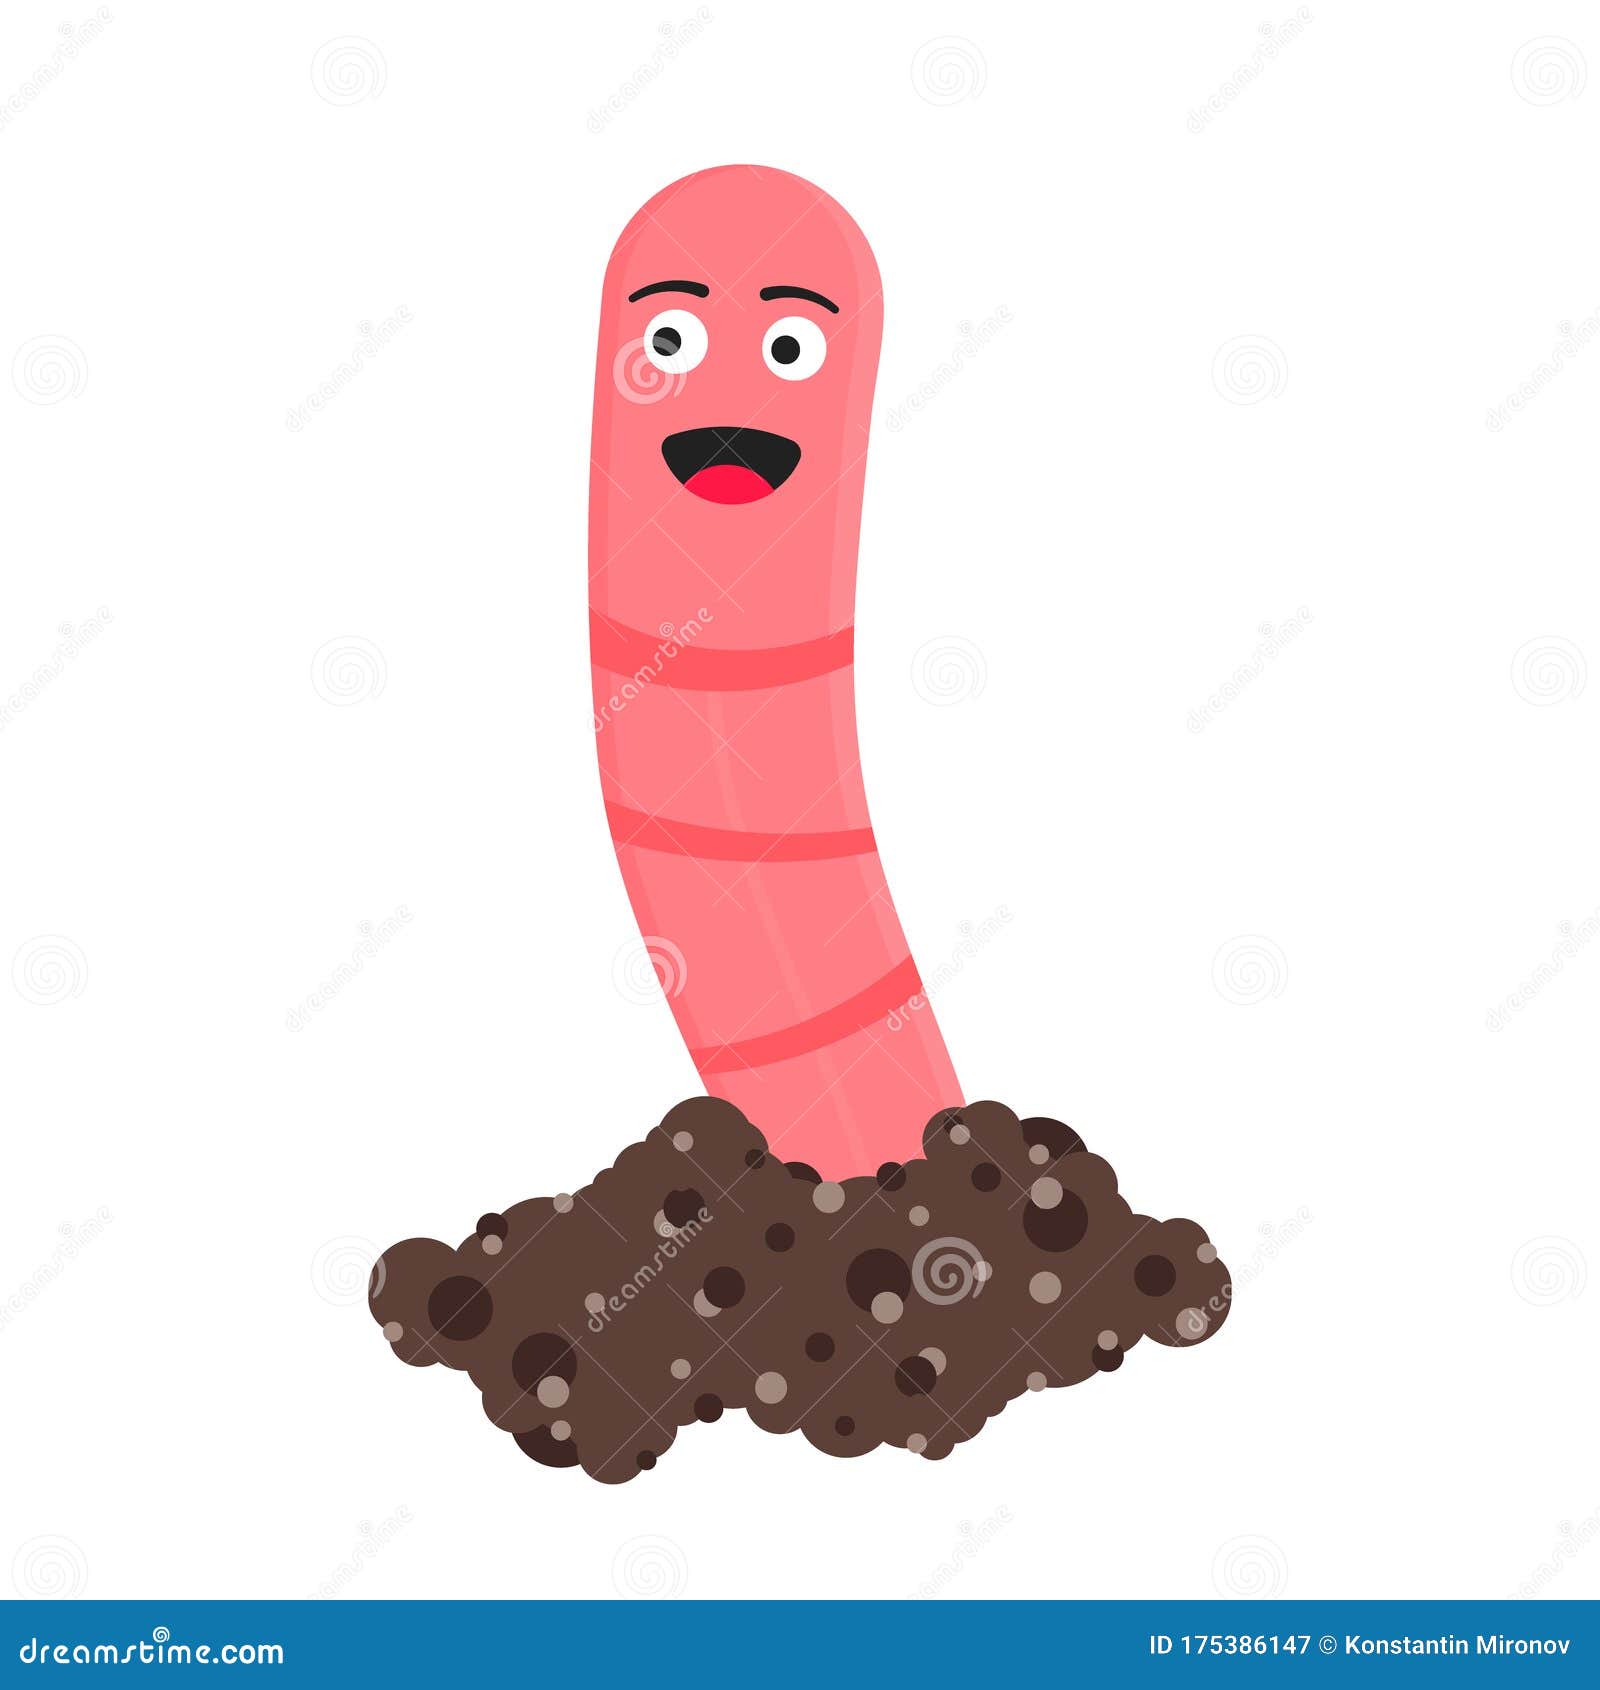 https://thumbs.dreamstime.com/z/earthworm-cartoon-character-icon-sigh-worm-face-expression-earthworm-cartoon-character-icon-sigh-worm-face-expression-175386147.jpg